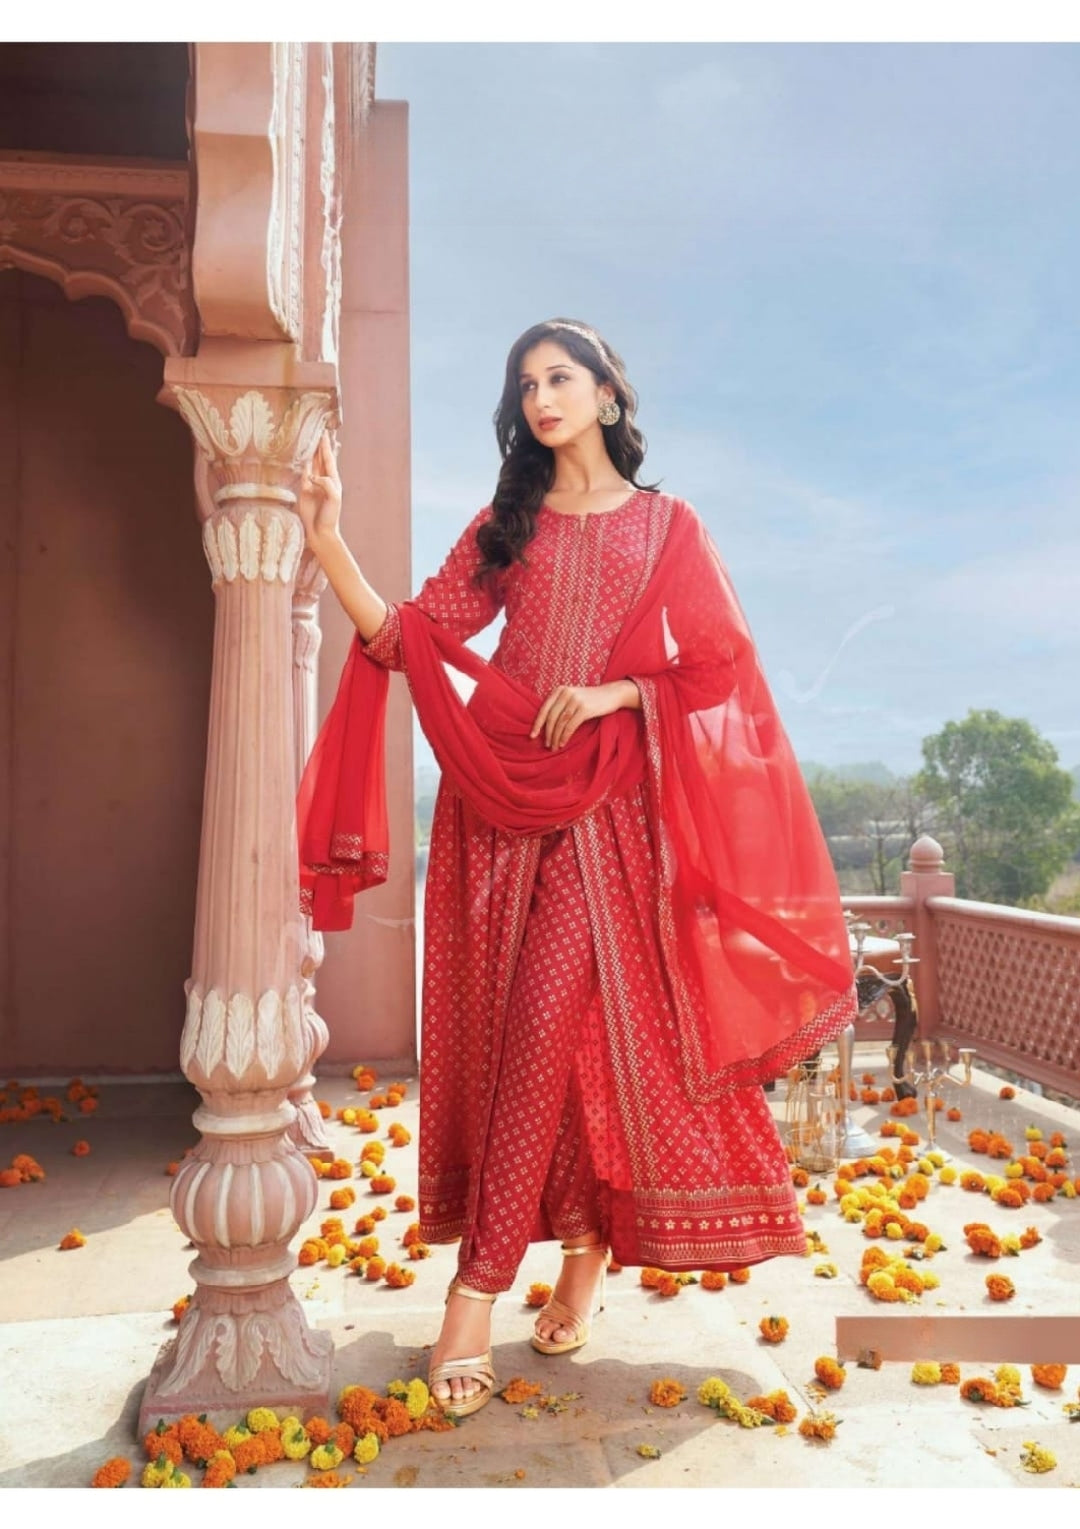 Rangriti by Mayur Fancy Wear Suit Anant Tex Exports Private Limited